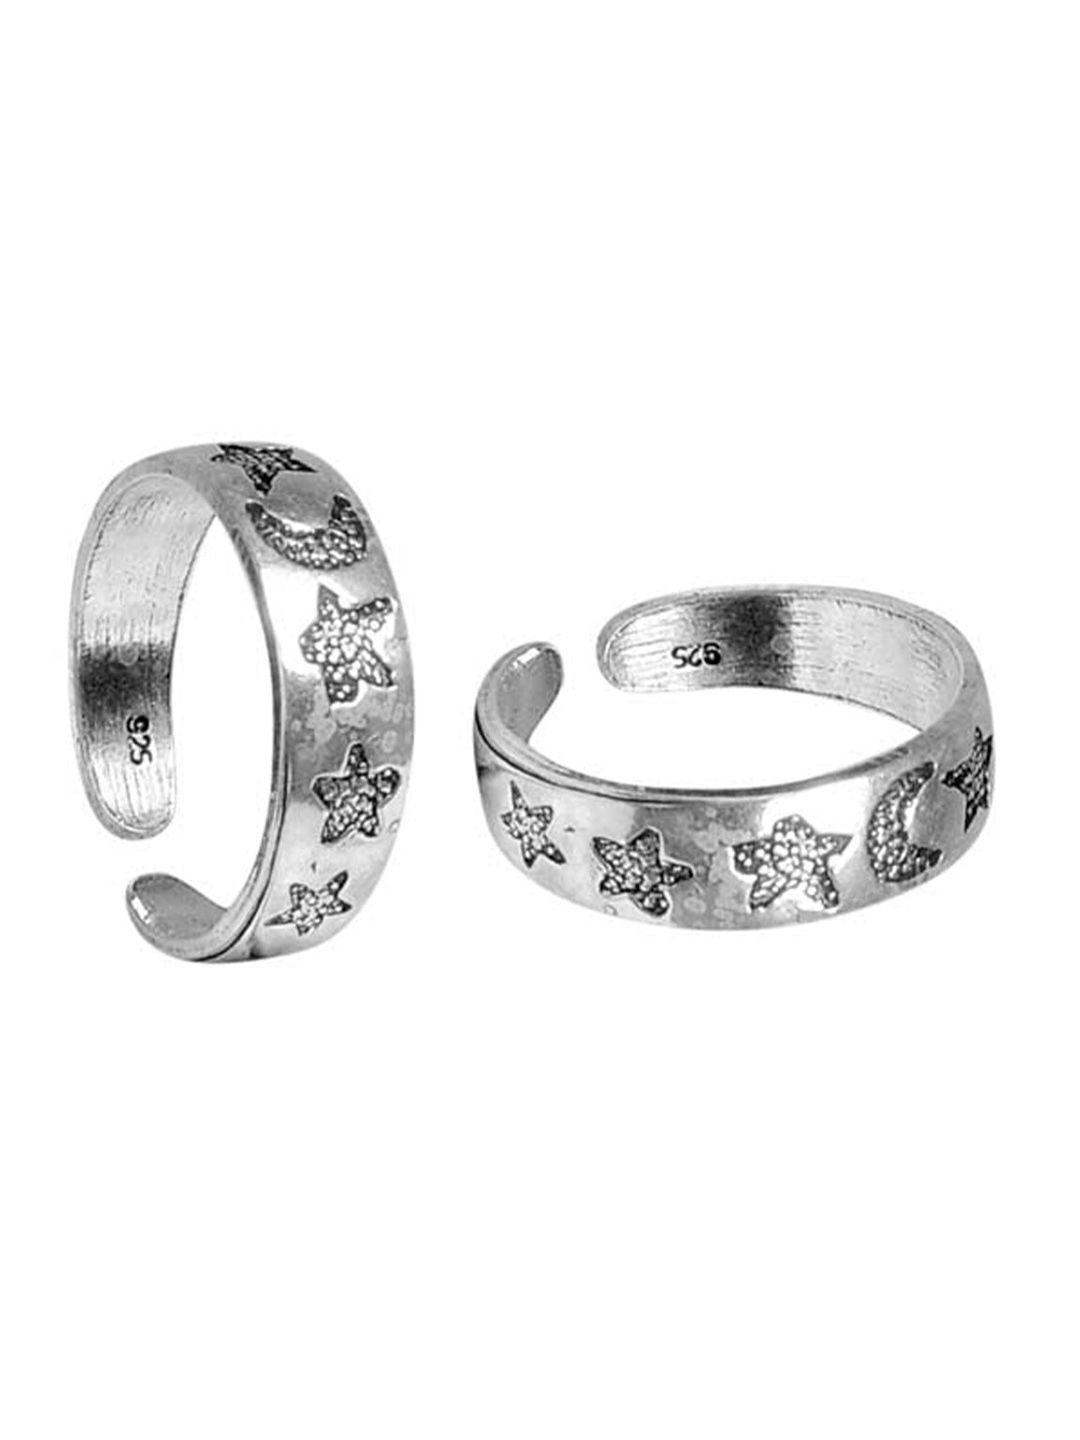 abhooshan-set-of-2-92.5-sterling-silver-set-of-2-engraved-oxidized-adjustable-toe-rings